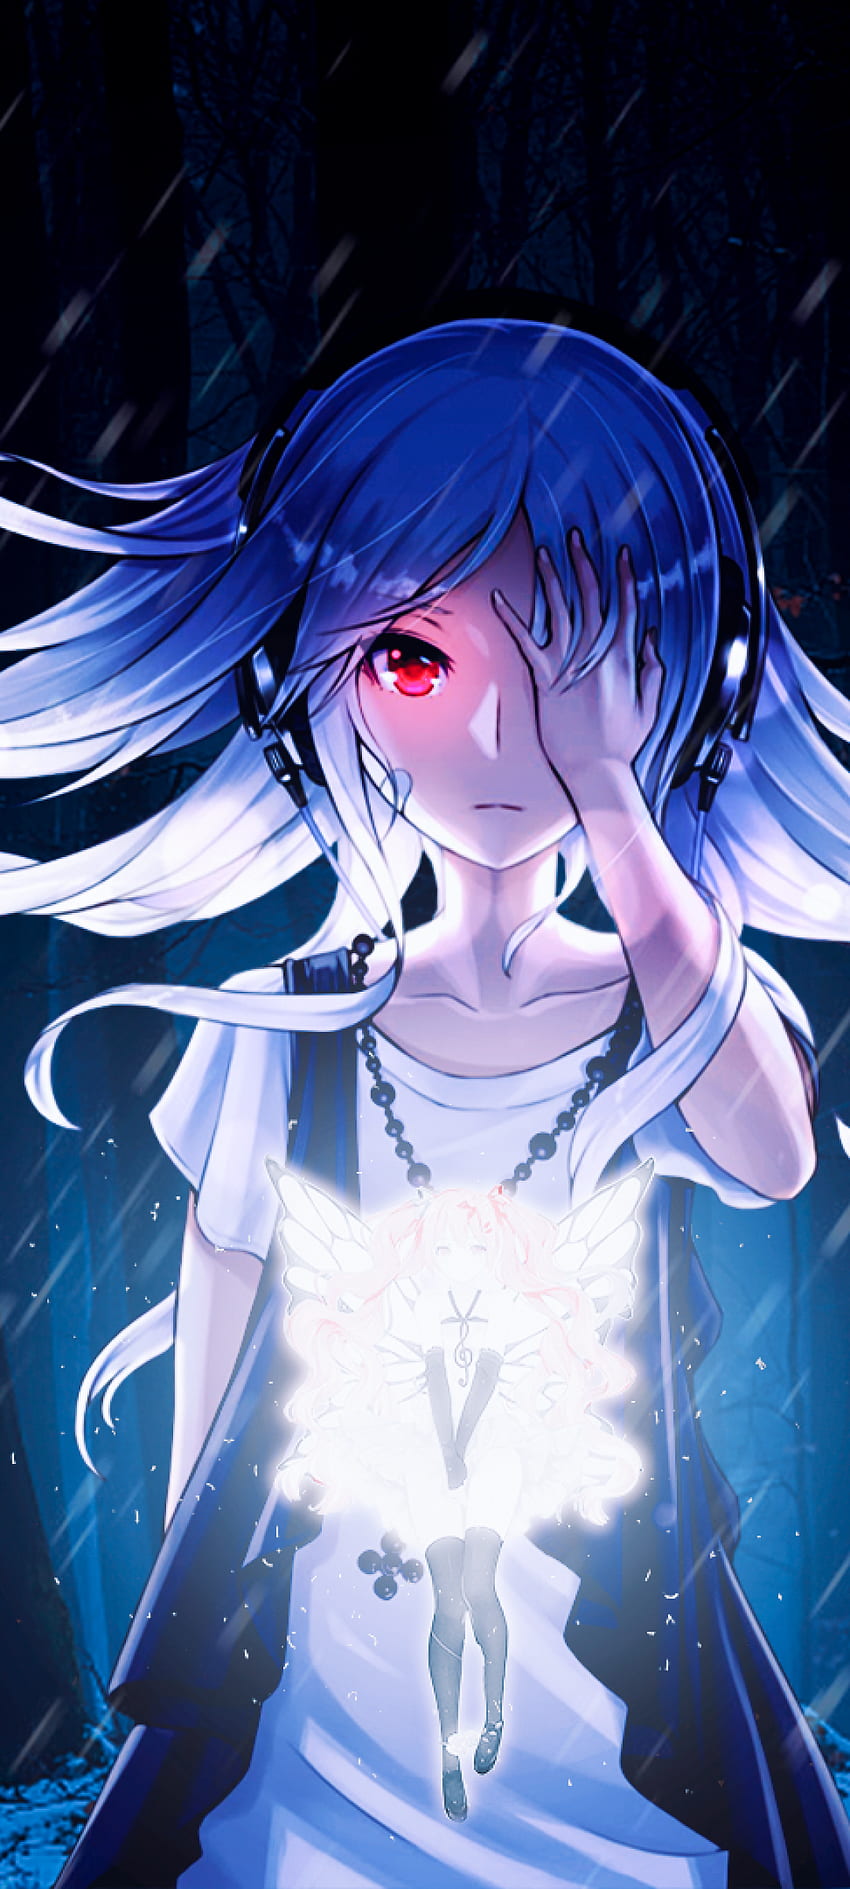 Anime Girl, Blizzard, Red Eyes, Glowing, Fairy, Forest for Samsung Galaxy Note 20 & S20 FE, Xiaomi Mi 10T Pro, Poco F2 Pro, Anime Glowing Eyes HD 전화 배경 화면